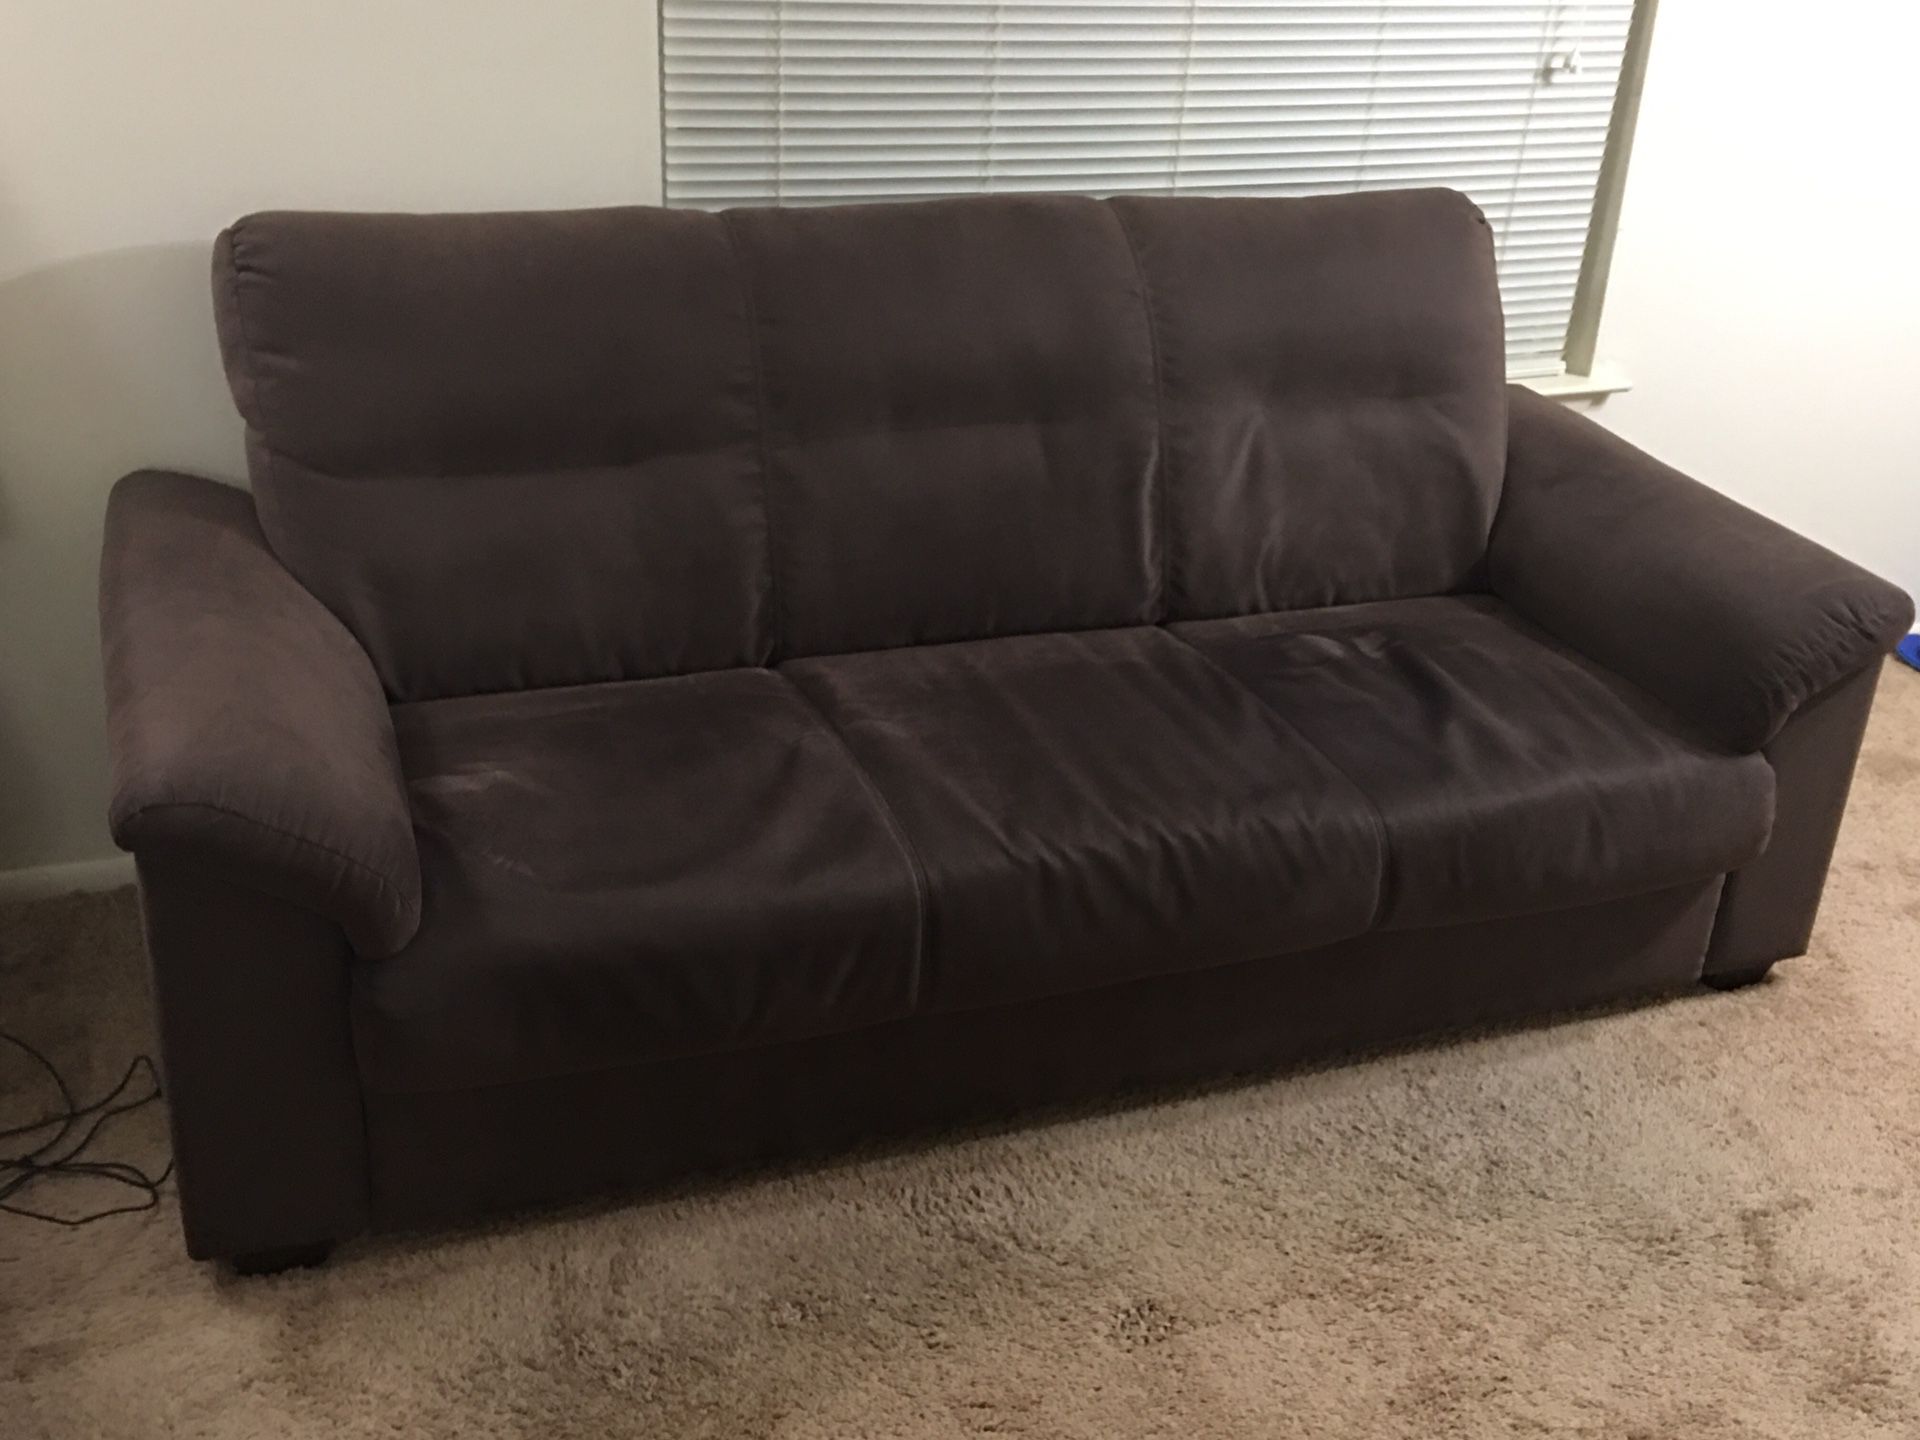 3 Year old IKEA 3 seater couch